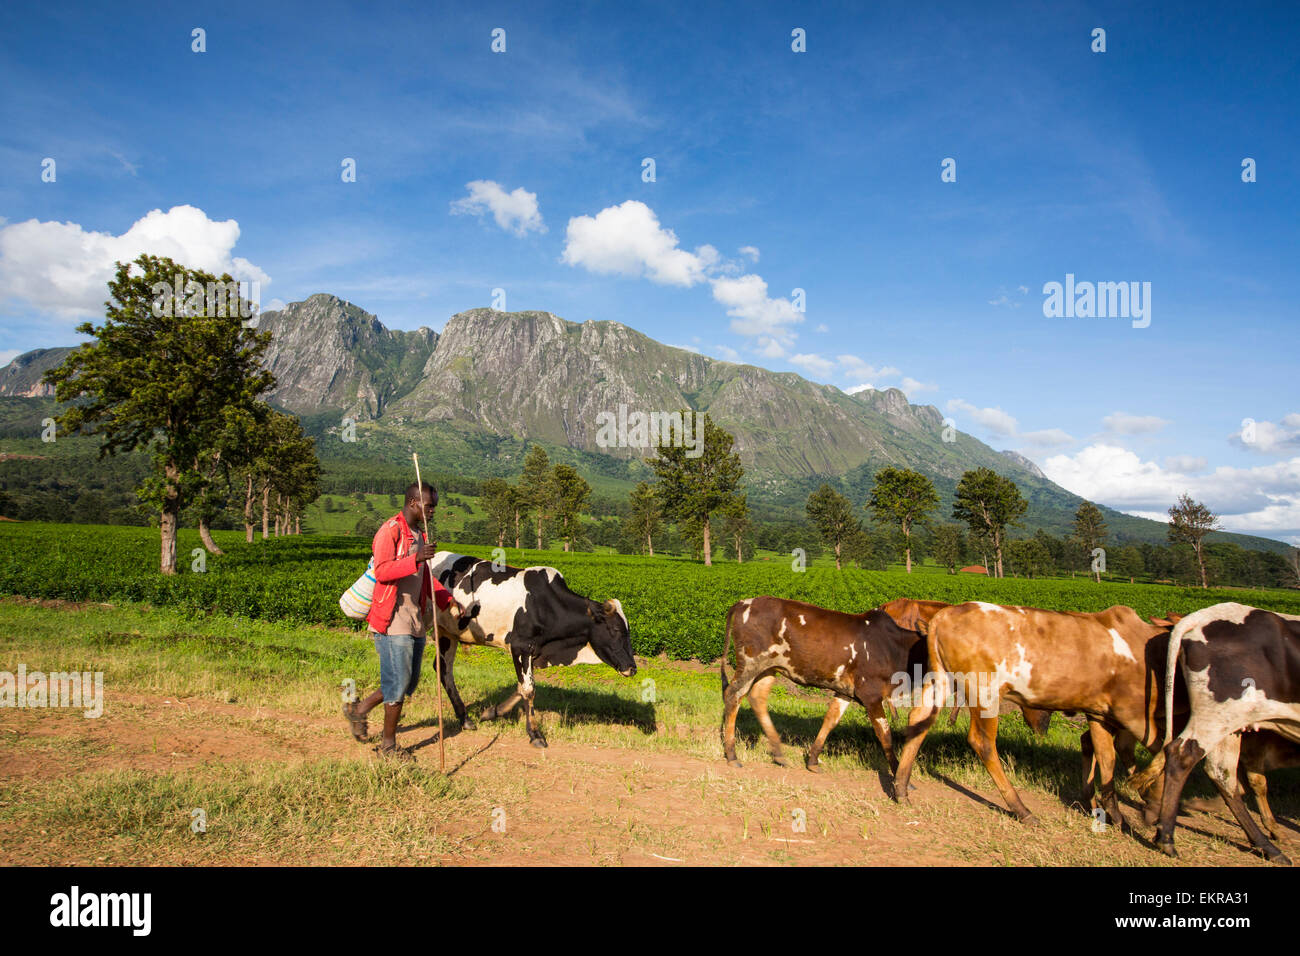 Tea plantations on the lower slopes of Mount Mulanje in Malawi, Africa, with a farmer herding his cows. Stock Photo